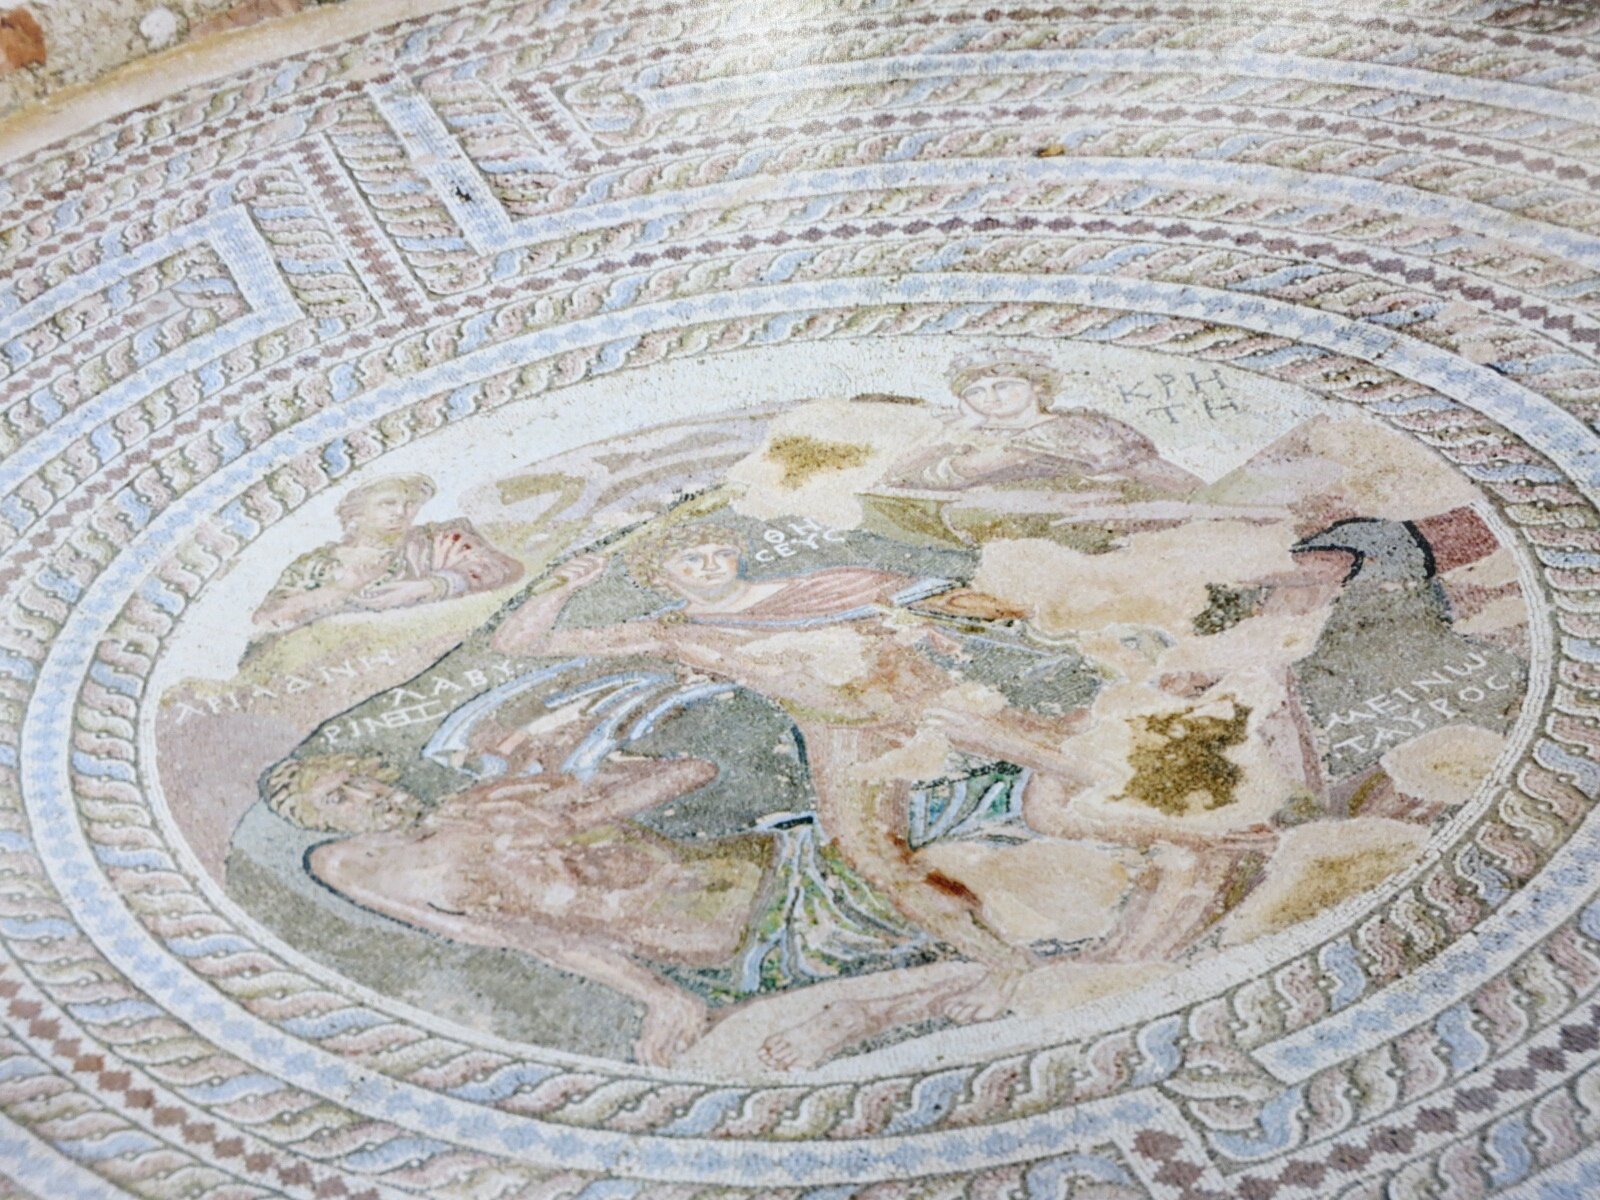   Derek Kreckler , detail of the work  The Labrynth Mosaic, The House of Theseus, Paphos,  2010-2011, from the exhibition  Response to Cyprus,  10 July 2013. The event was hosted by the Australian Archaeological Institute at Athens (AAIA) at the Cent